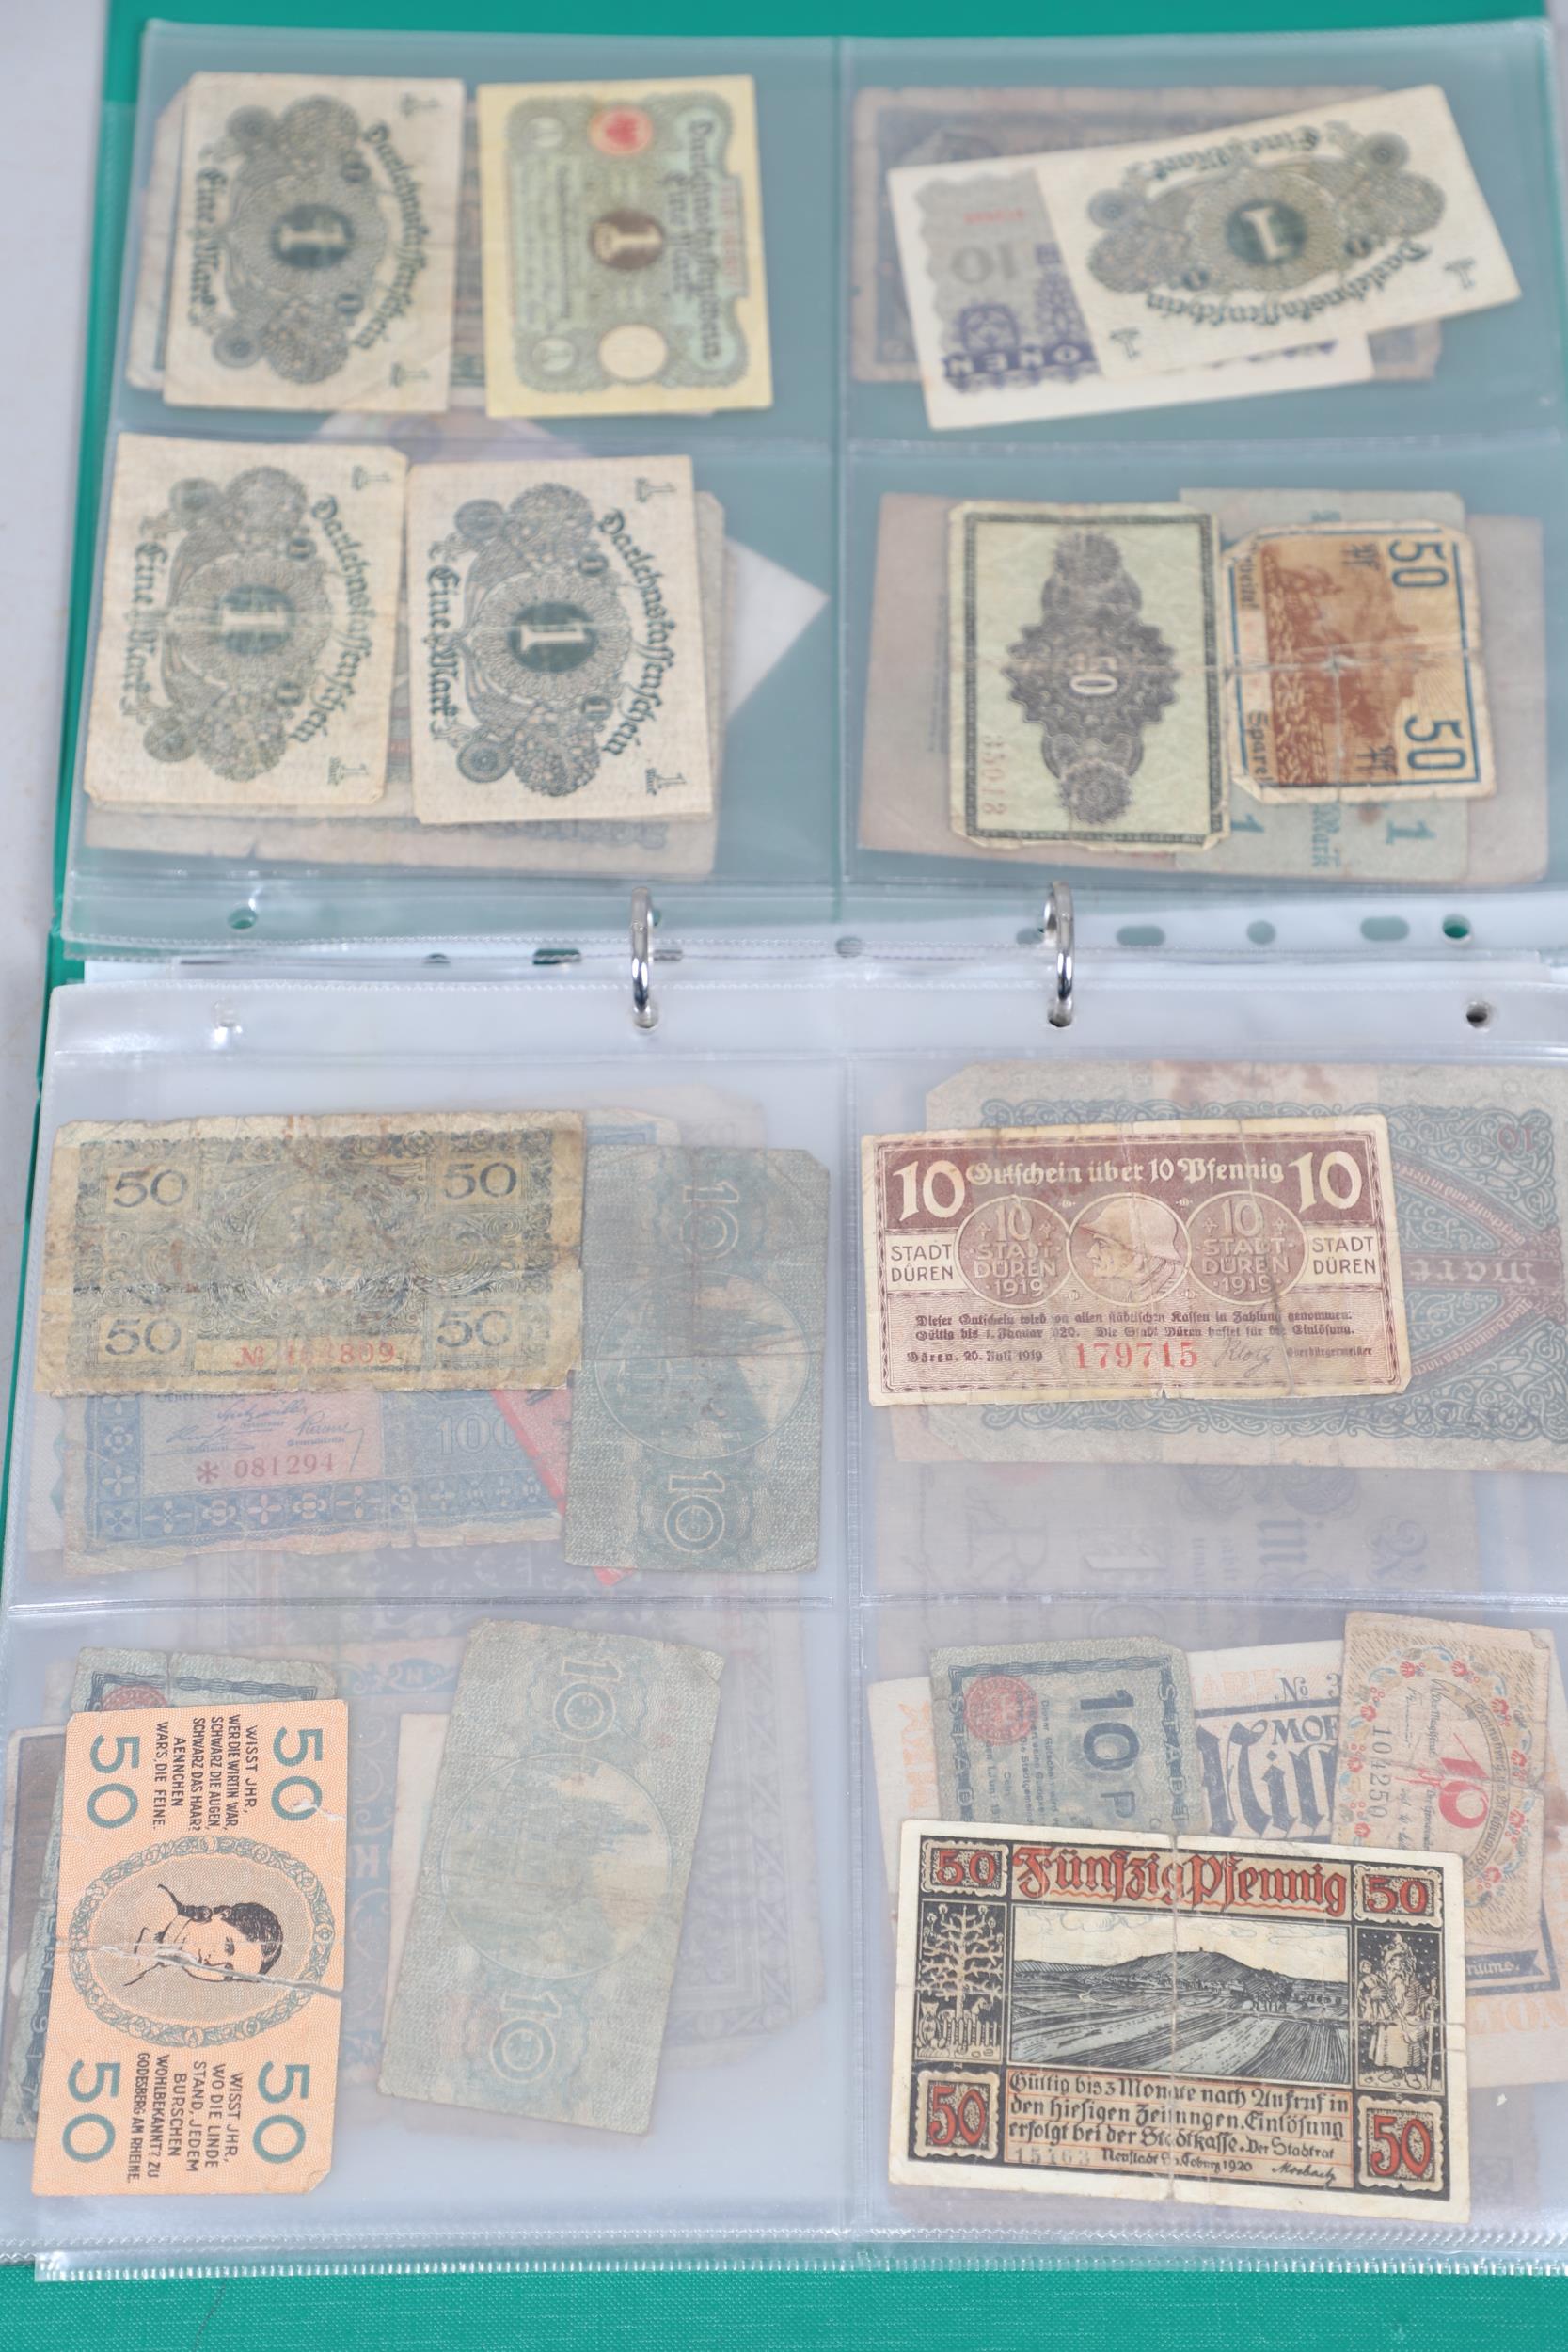 AN EXTENSIVE COLLECTION OF WORLD BANKNOTES. - Image 49 of 56